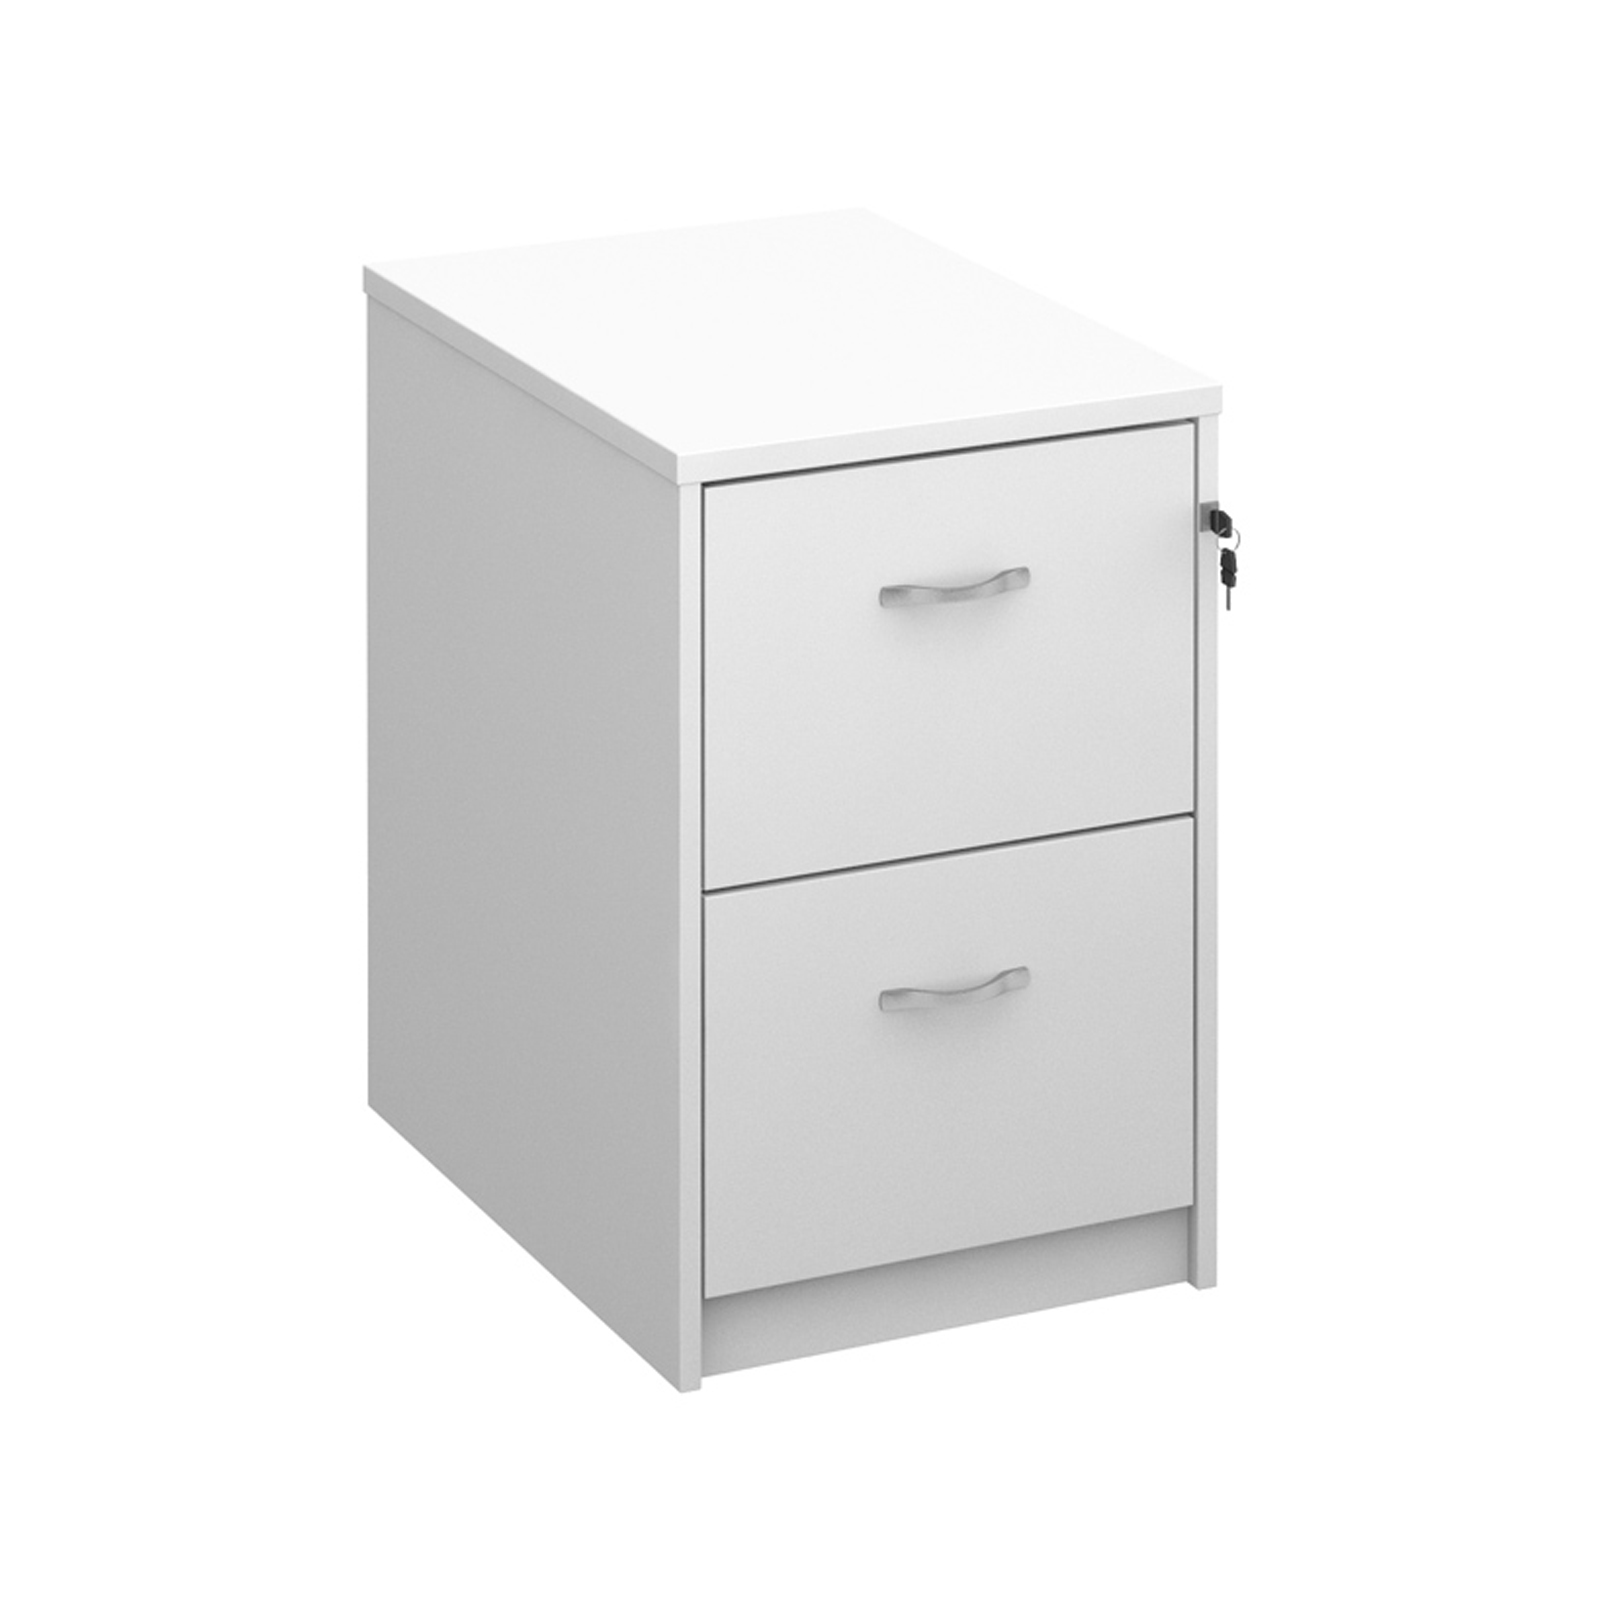 Wood Wooden 2 drawer filing cabinet with silver handles 730mm high - white